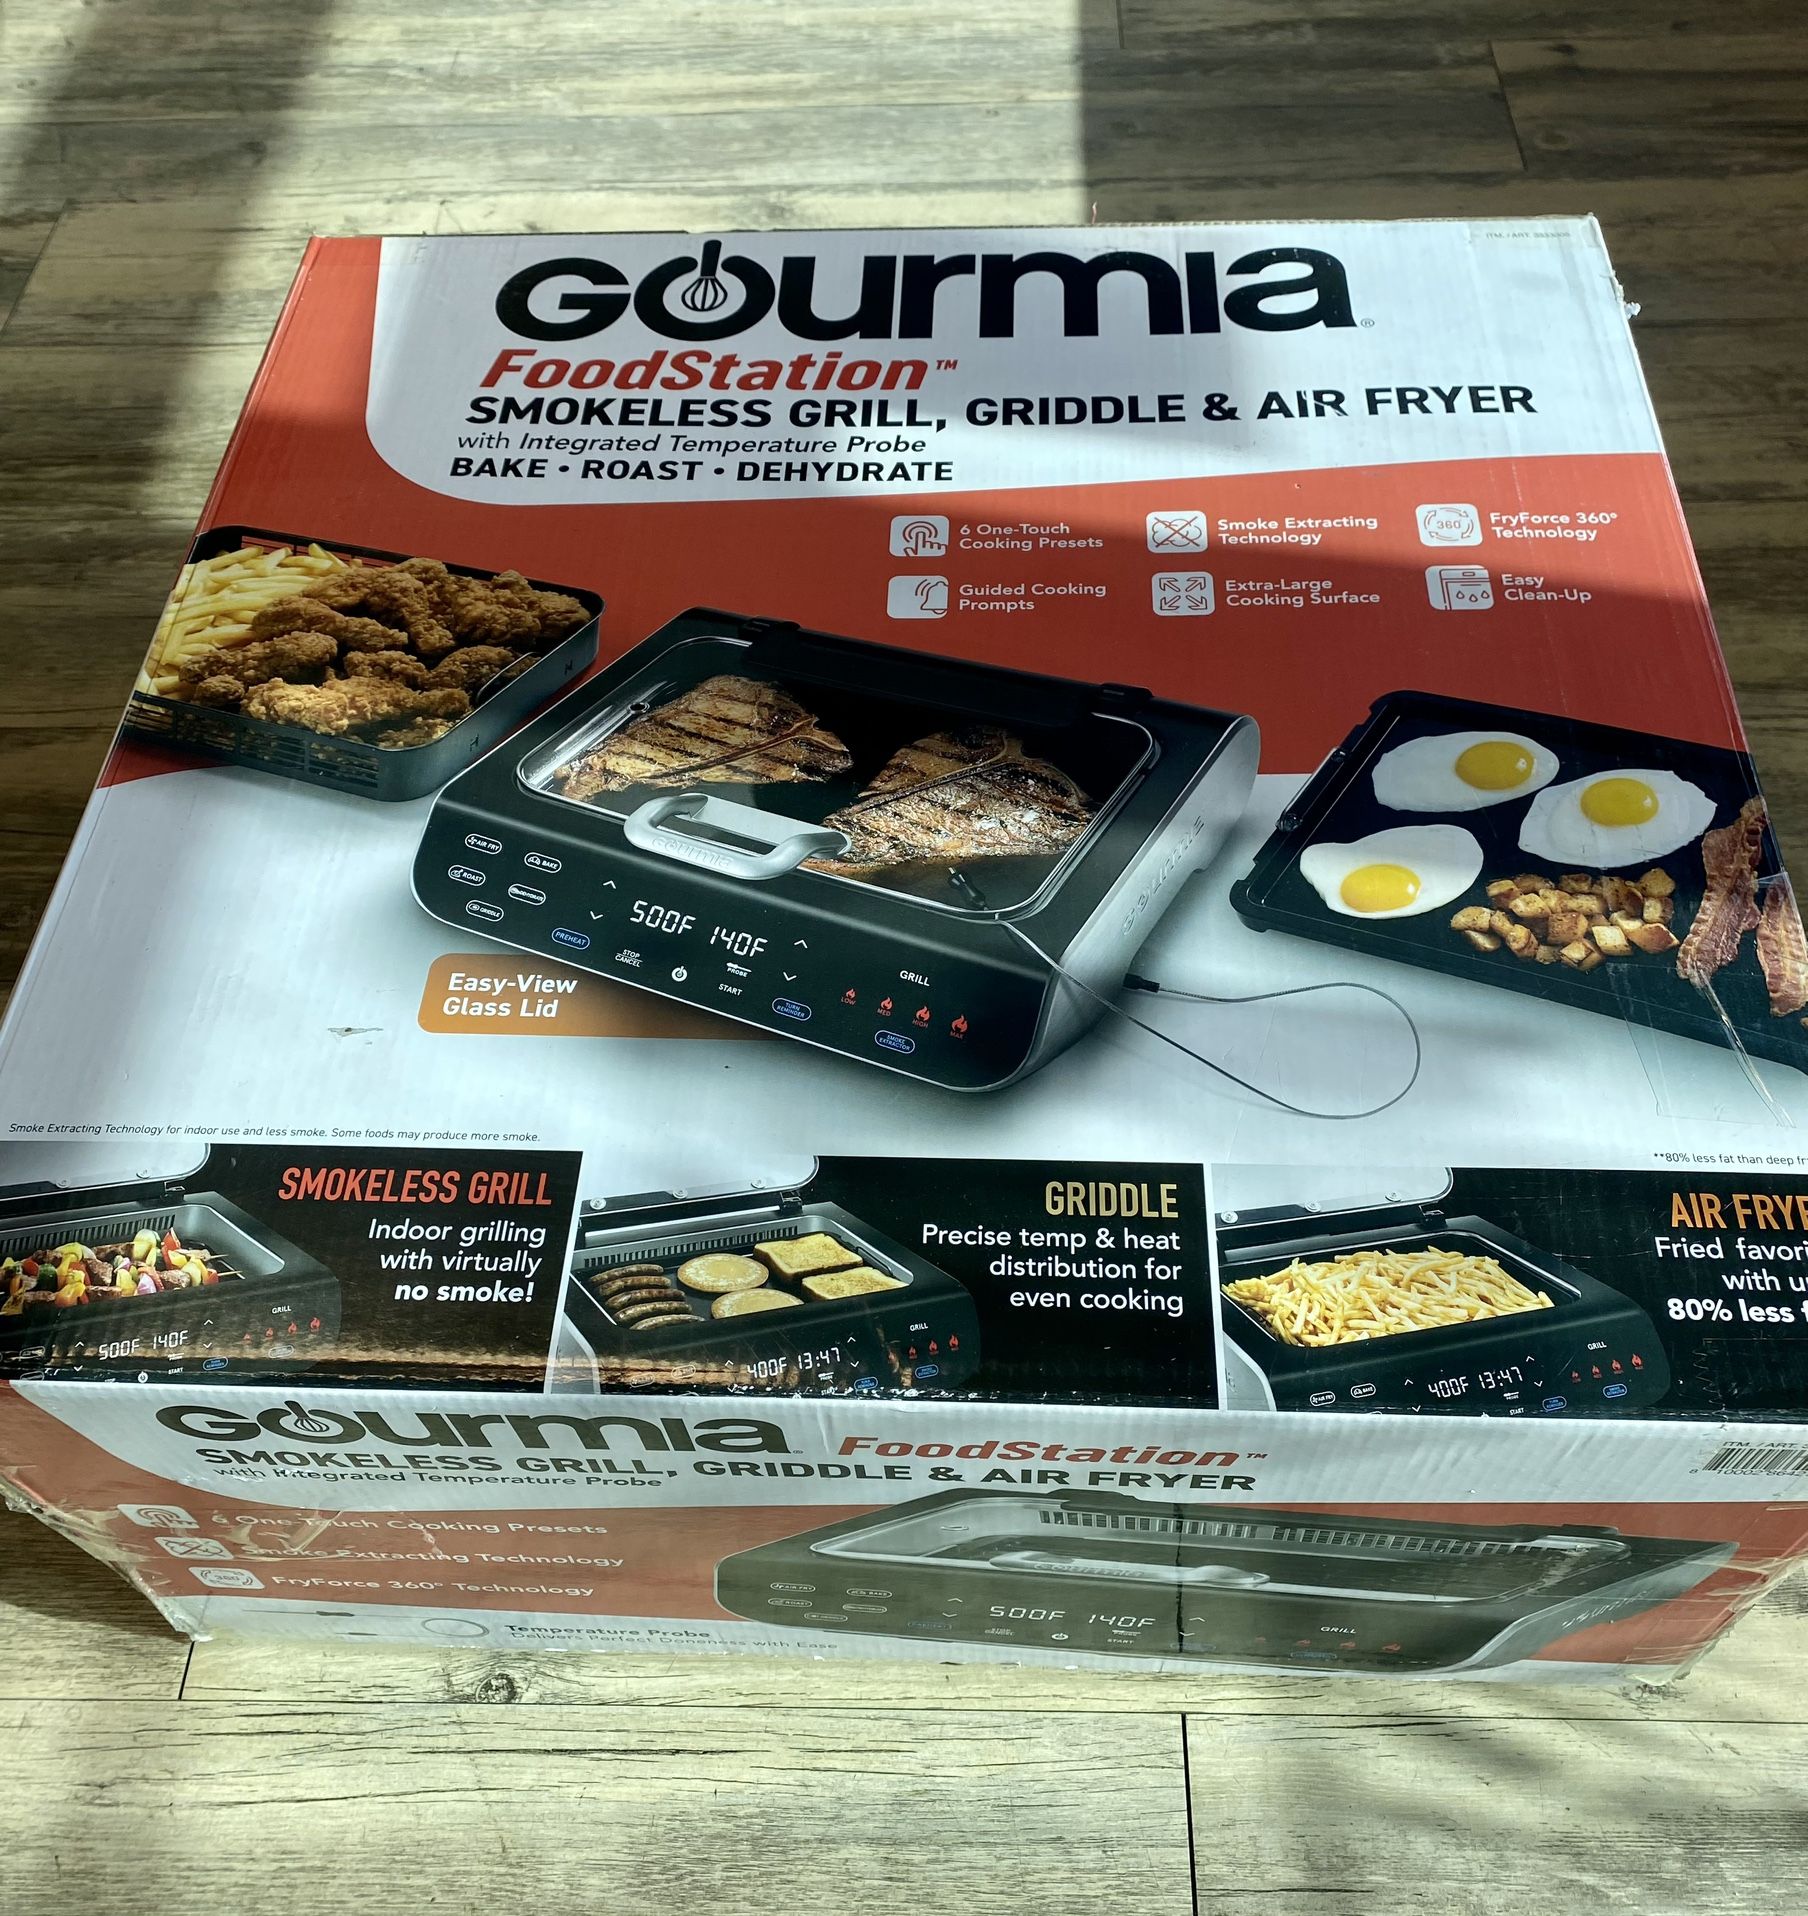 Gourmia FoodStation Smokeless Grill, Air Fryer And Griddle